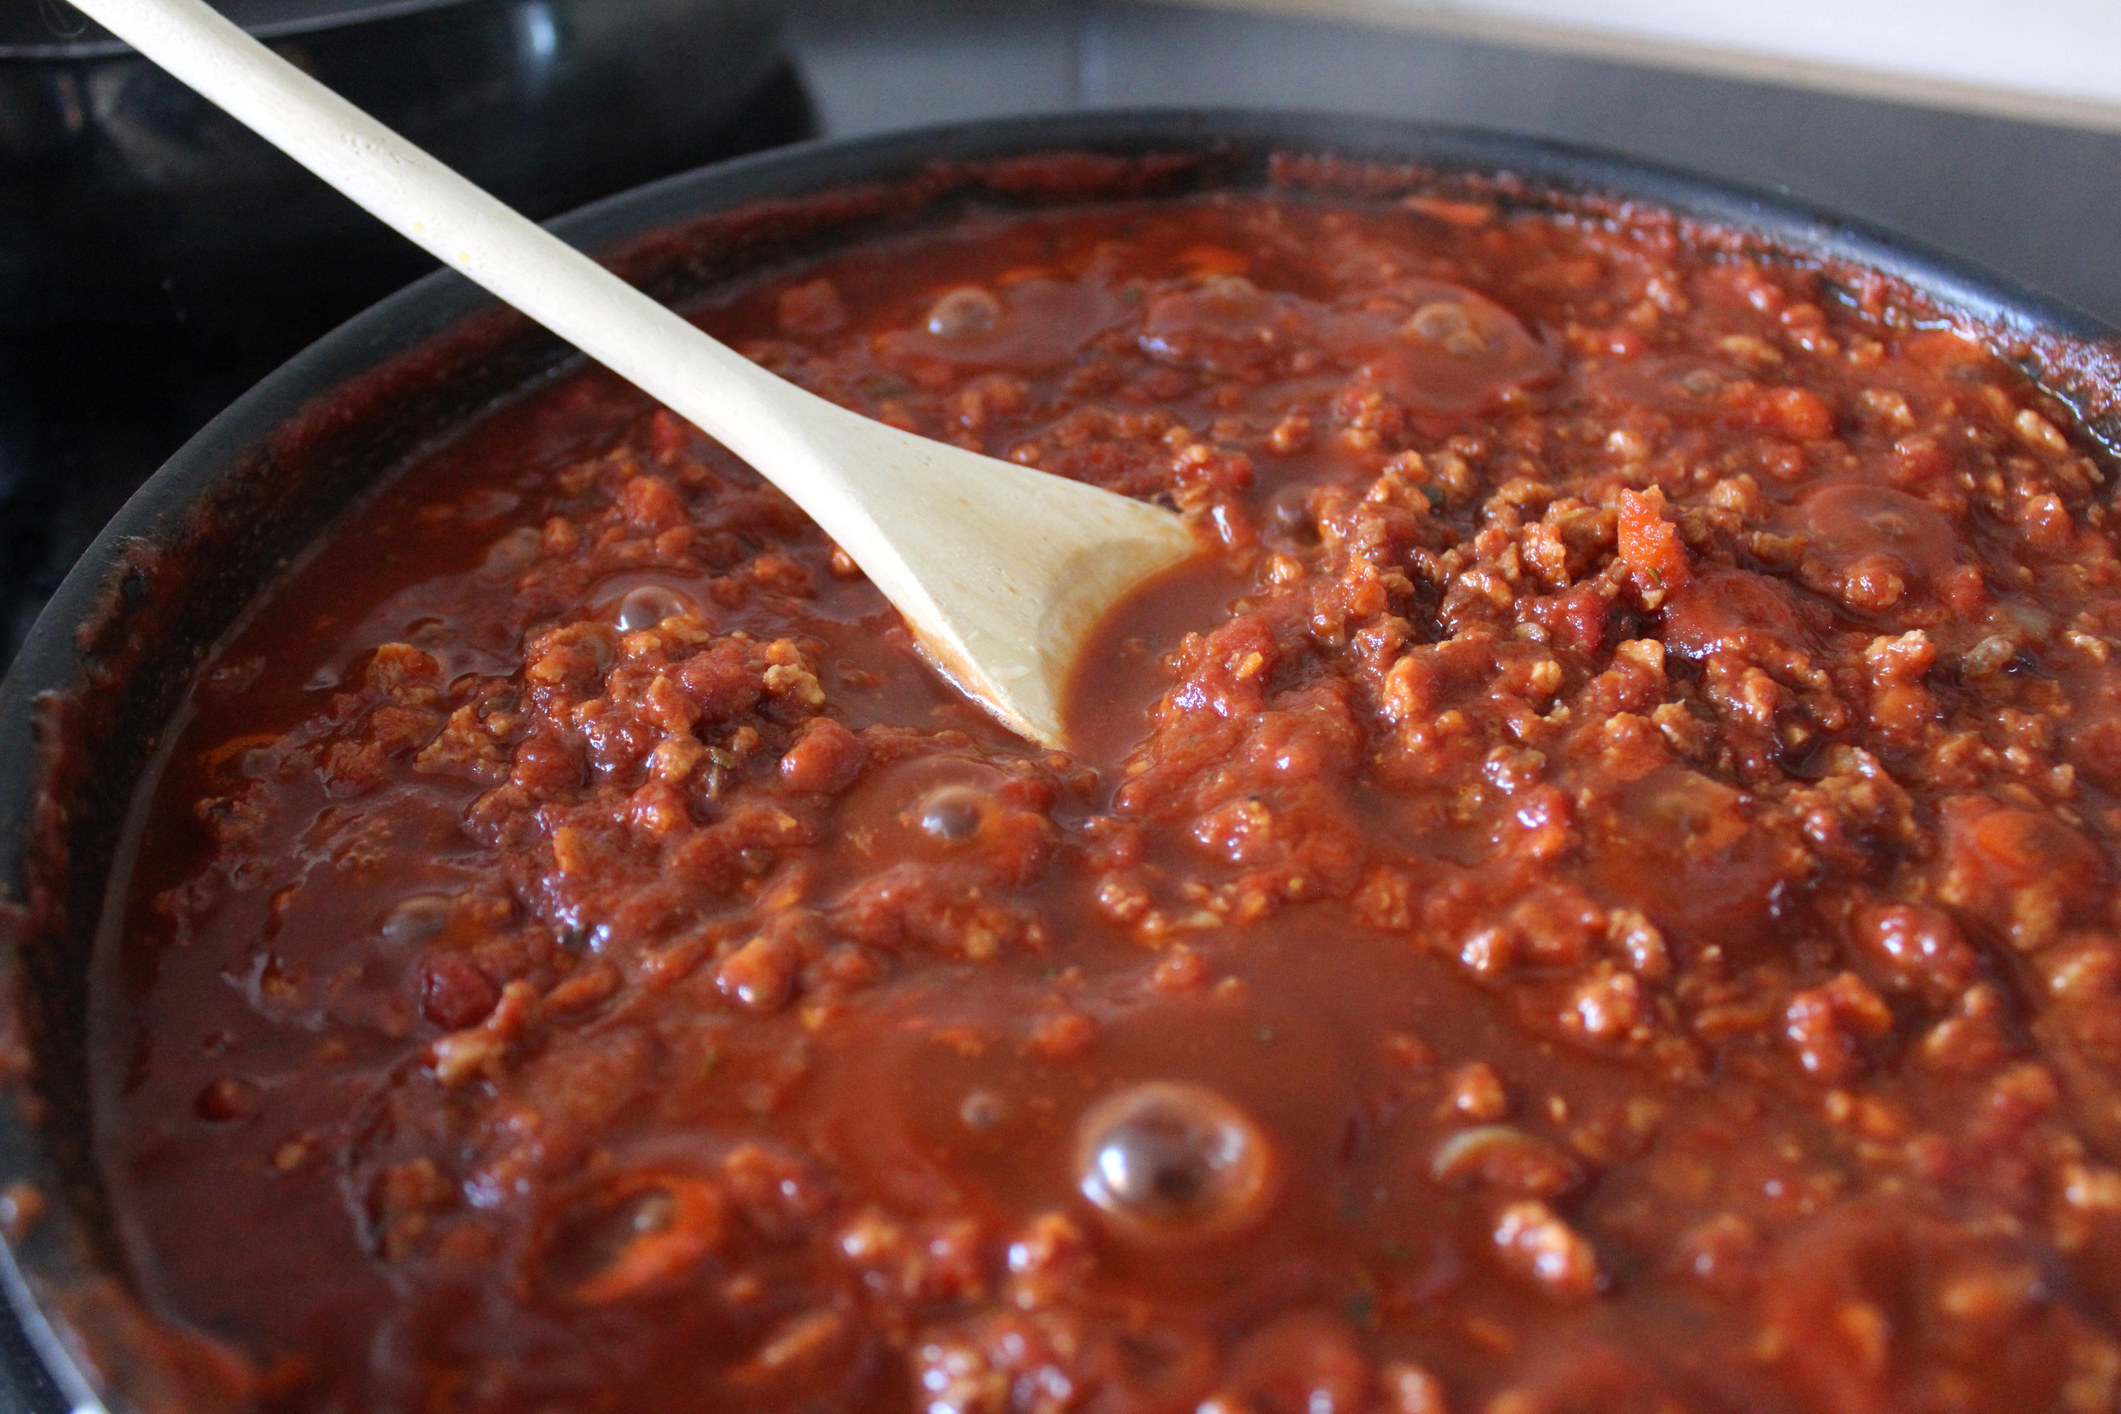 Image of Bolognese sauce cooking in frying pan.